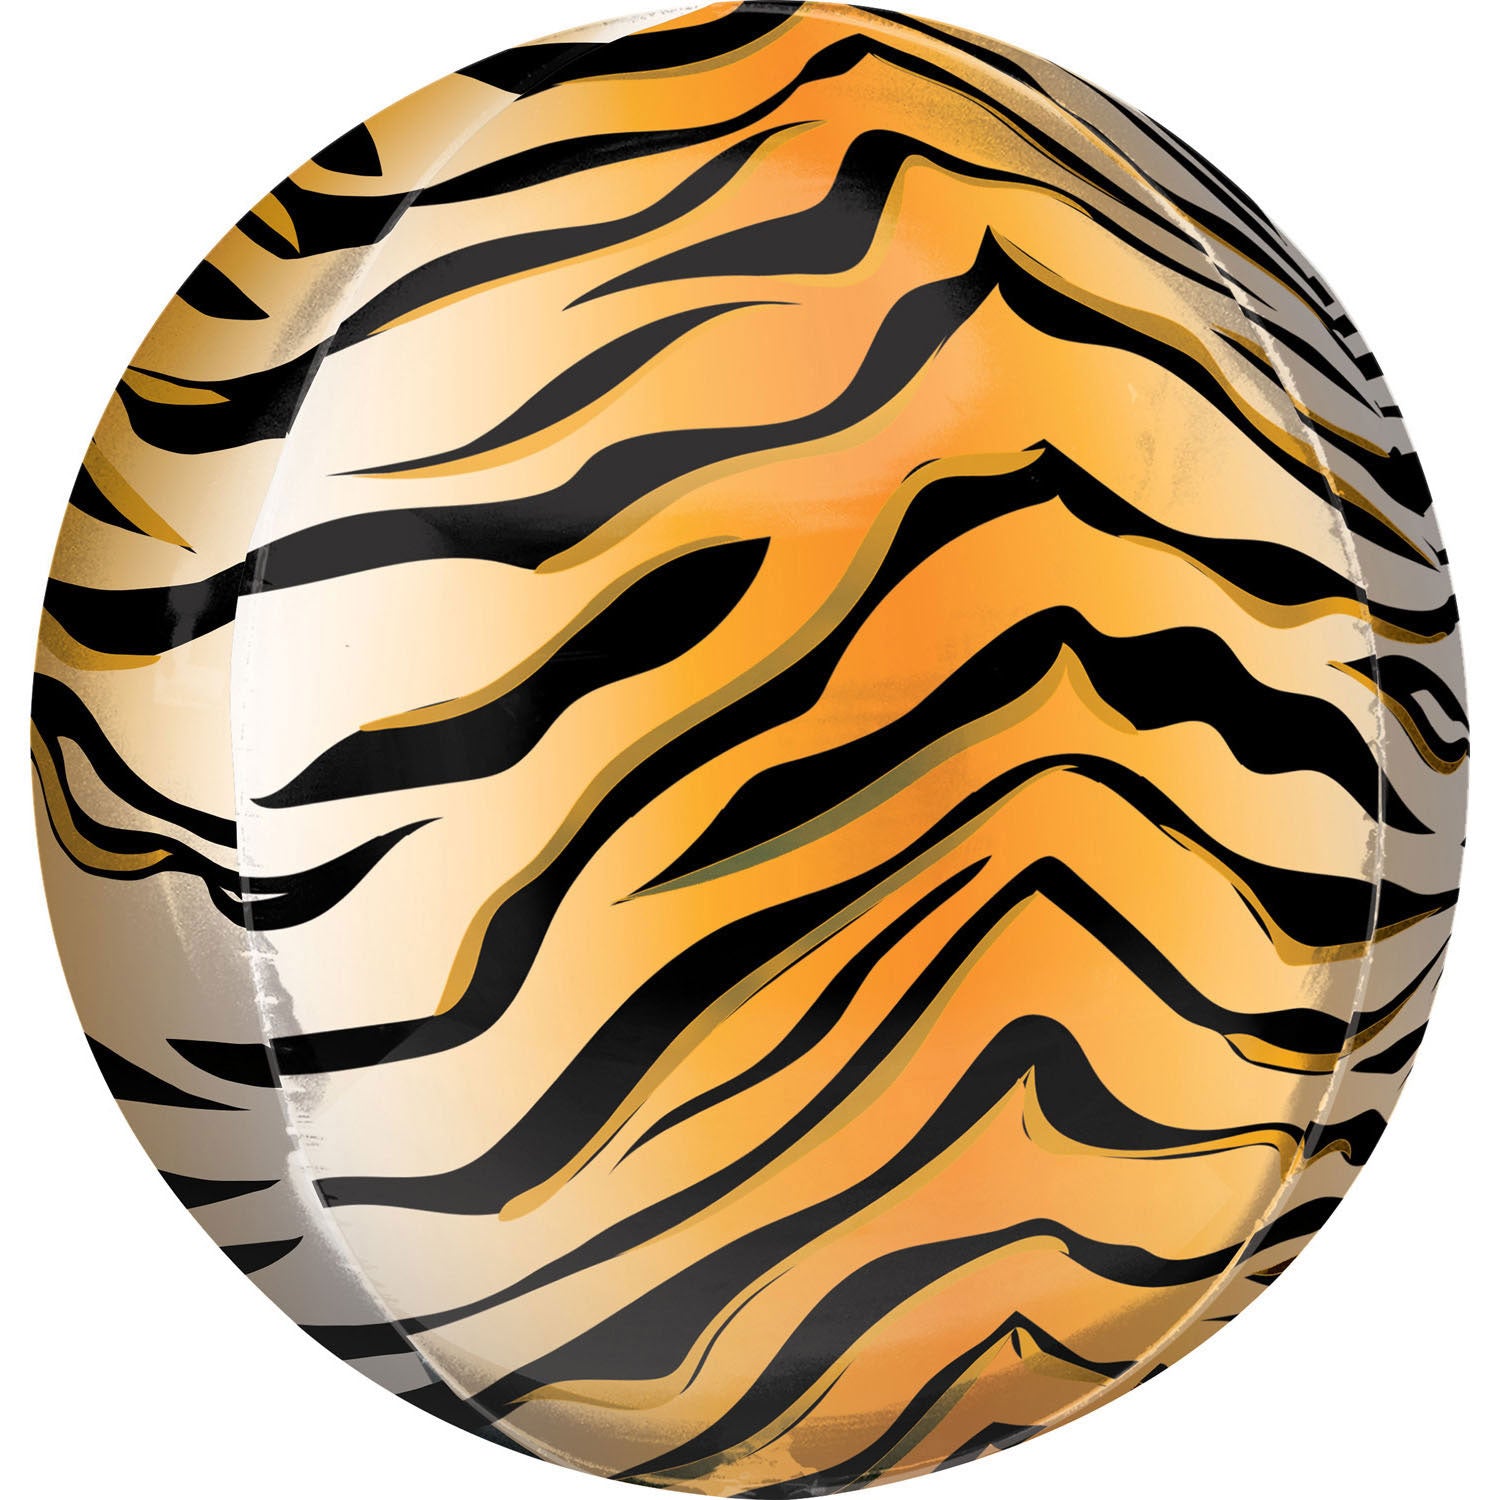 Spherical balloon with tiger skin design